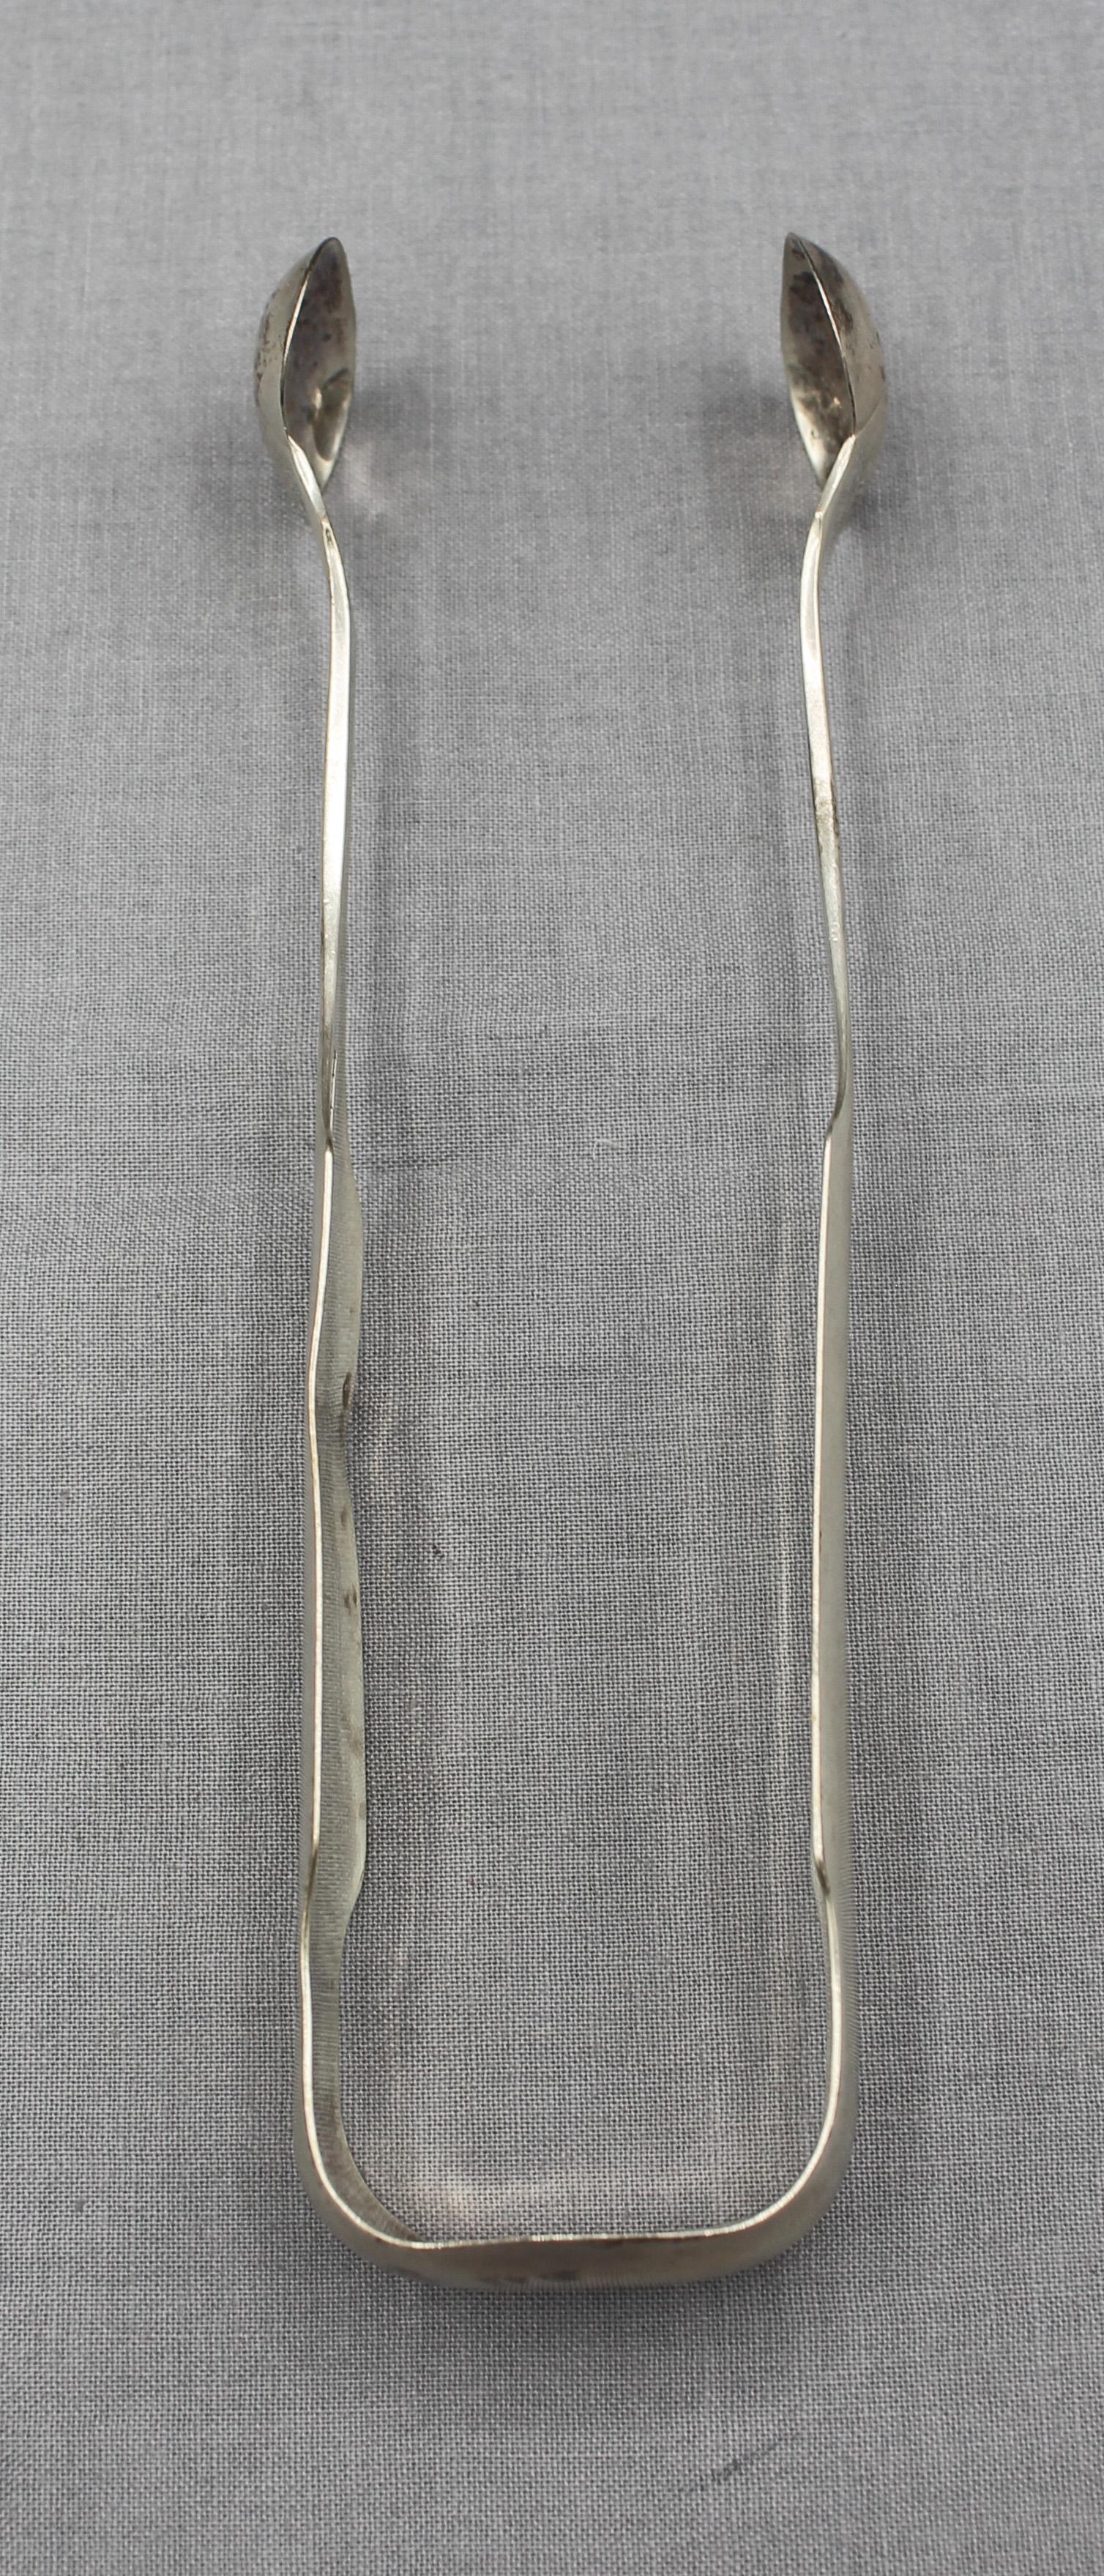 Coin silver sugar tongs by Robert Keyworth, Washington, DC, 1830-33. Silver from our capitol's early days is rare! Monogram: AEB. Minor edge bend. 1.30 troy oz.
6.25